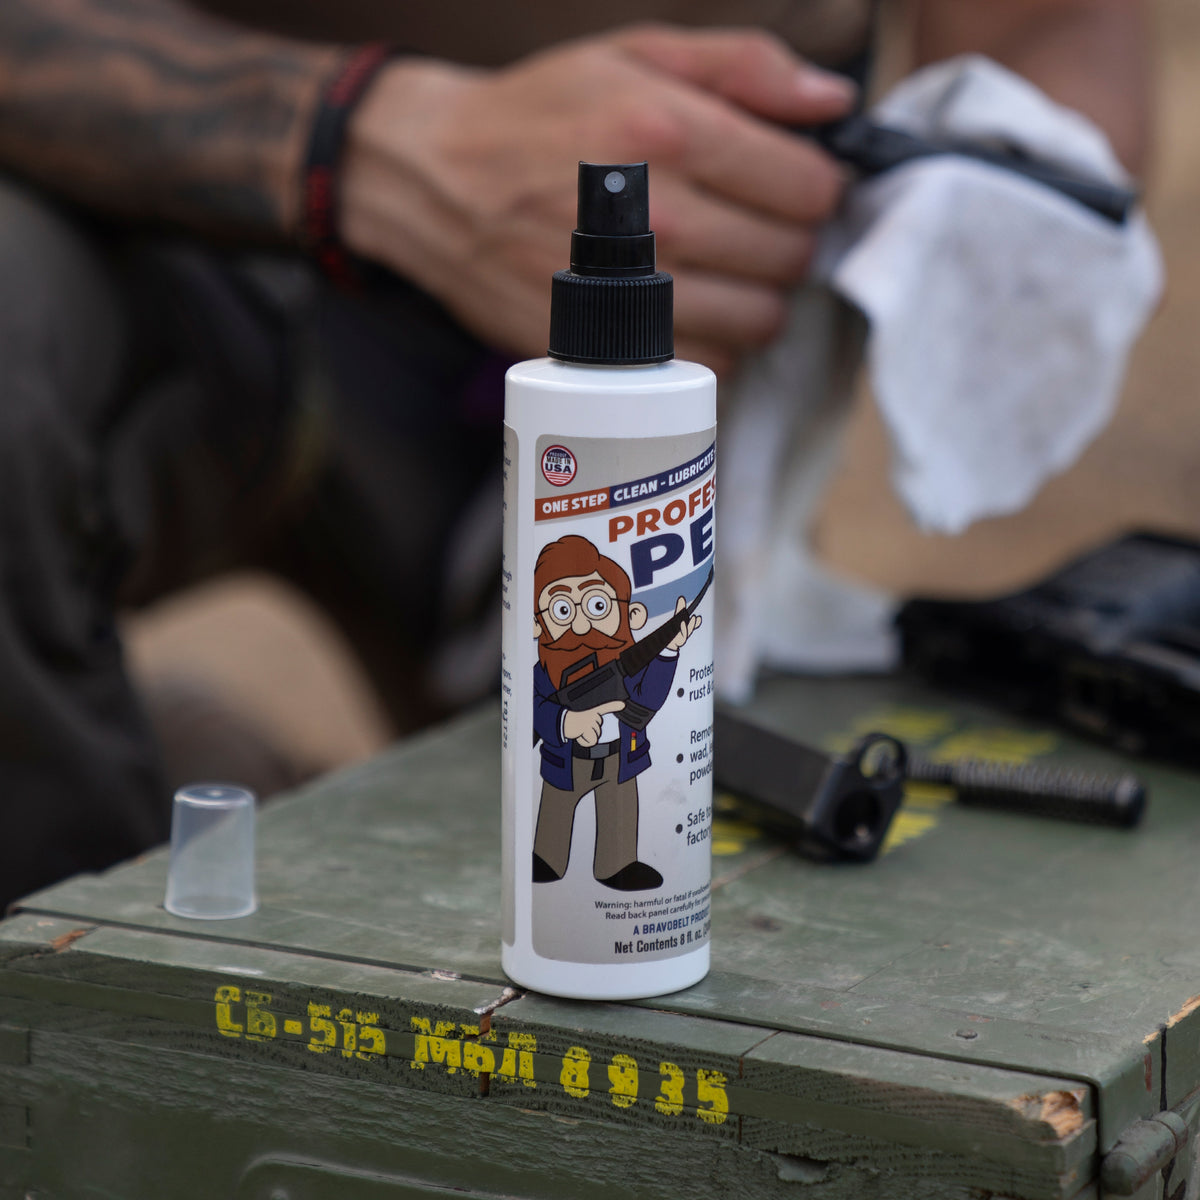 Professor Pew Gun Rust Remover – Clean, Lube, and Protect against Build-Up | Military Grade CLP Degreaser Oil for all Firearms